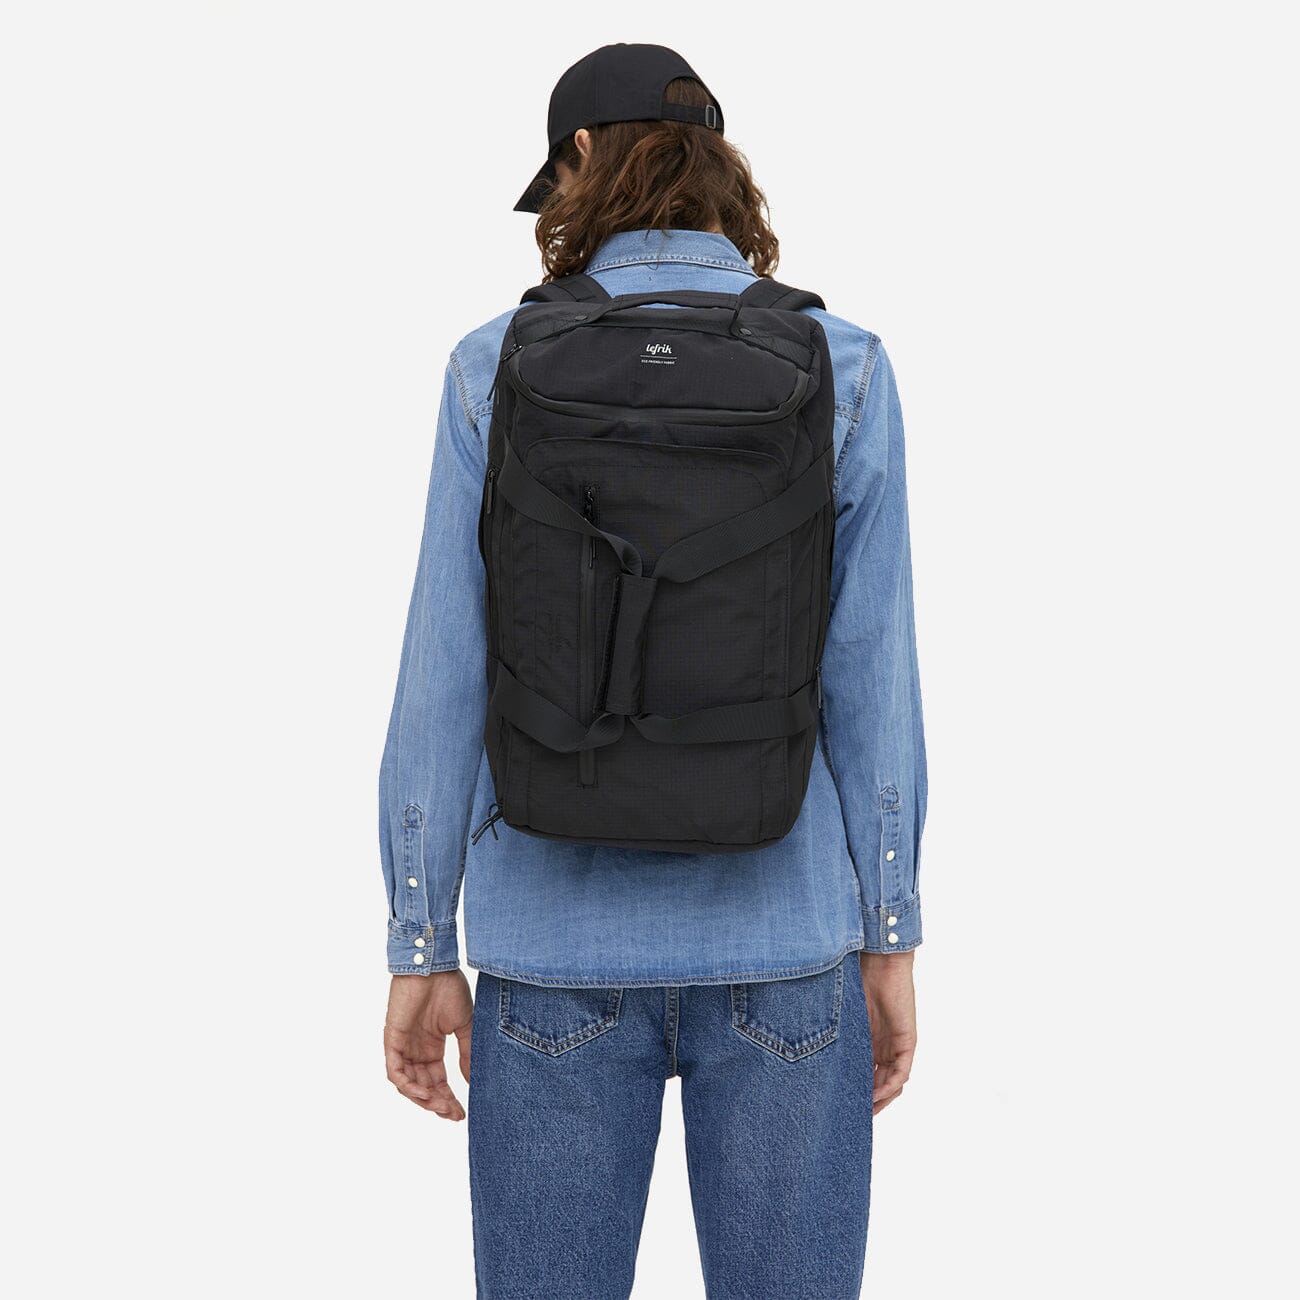 Man wearing black convertible backpack made from recycled materials, back view